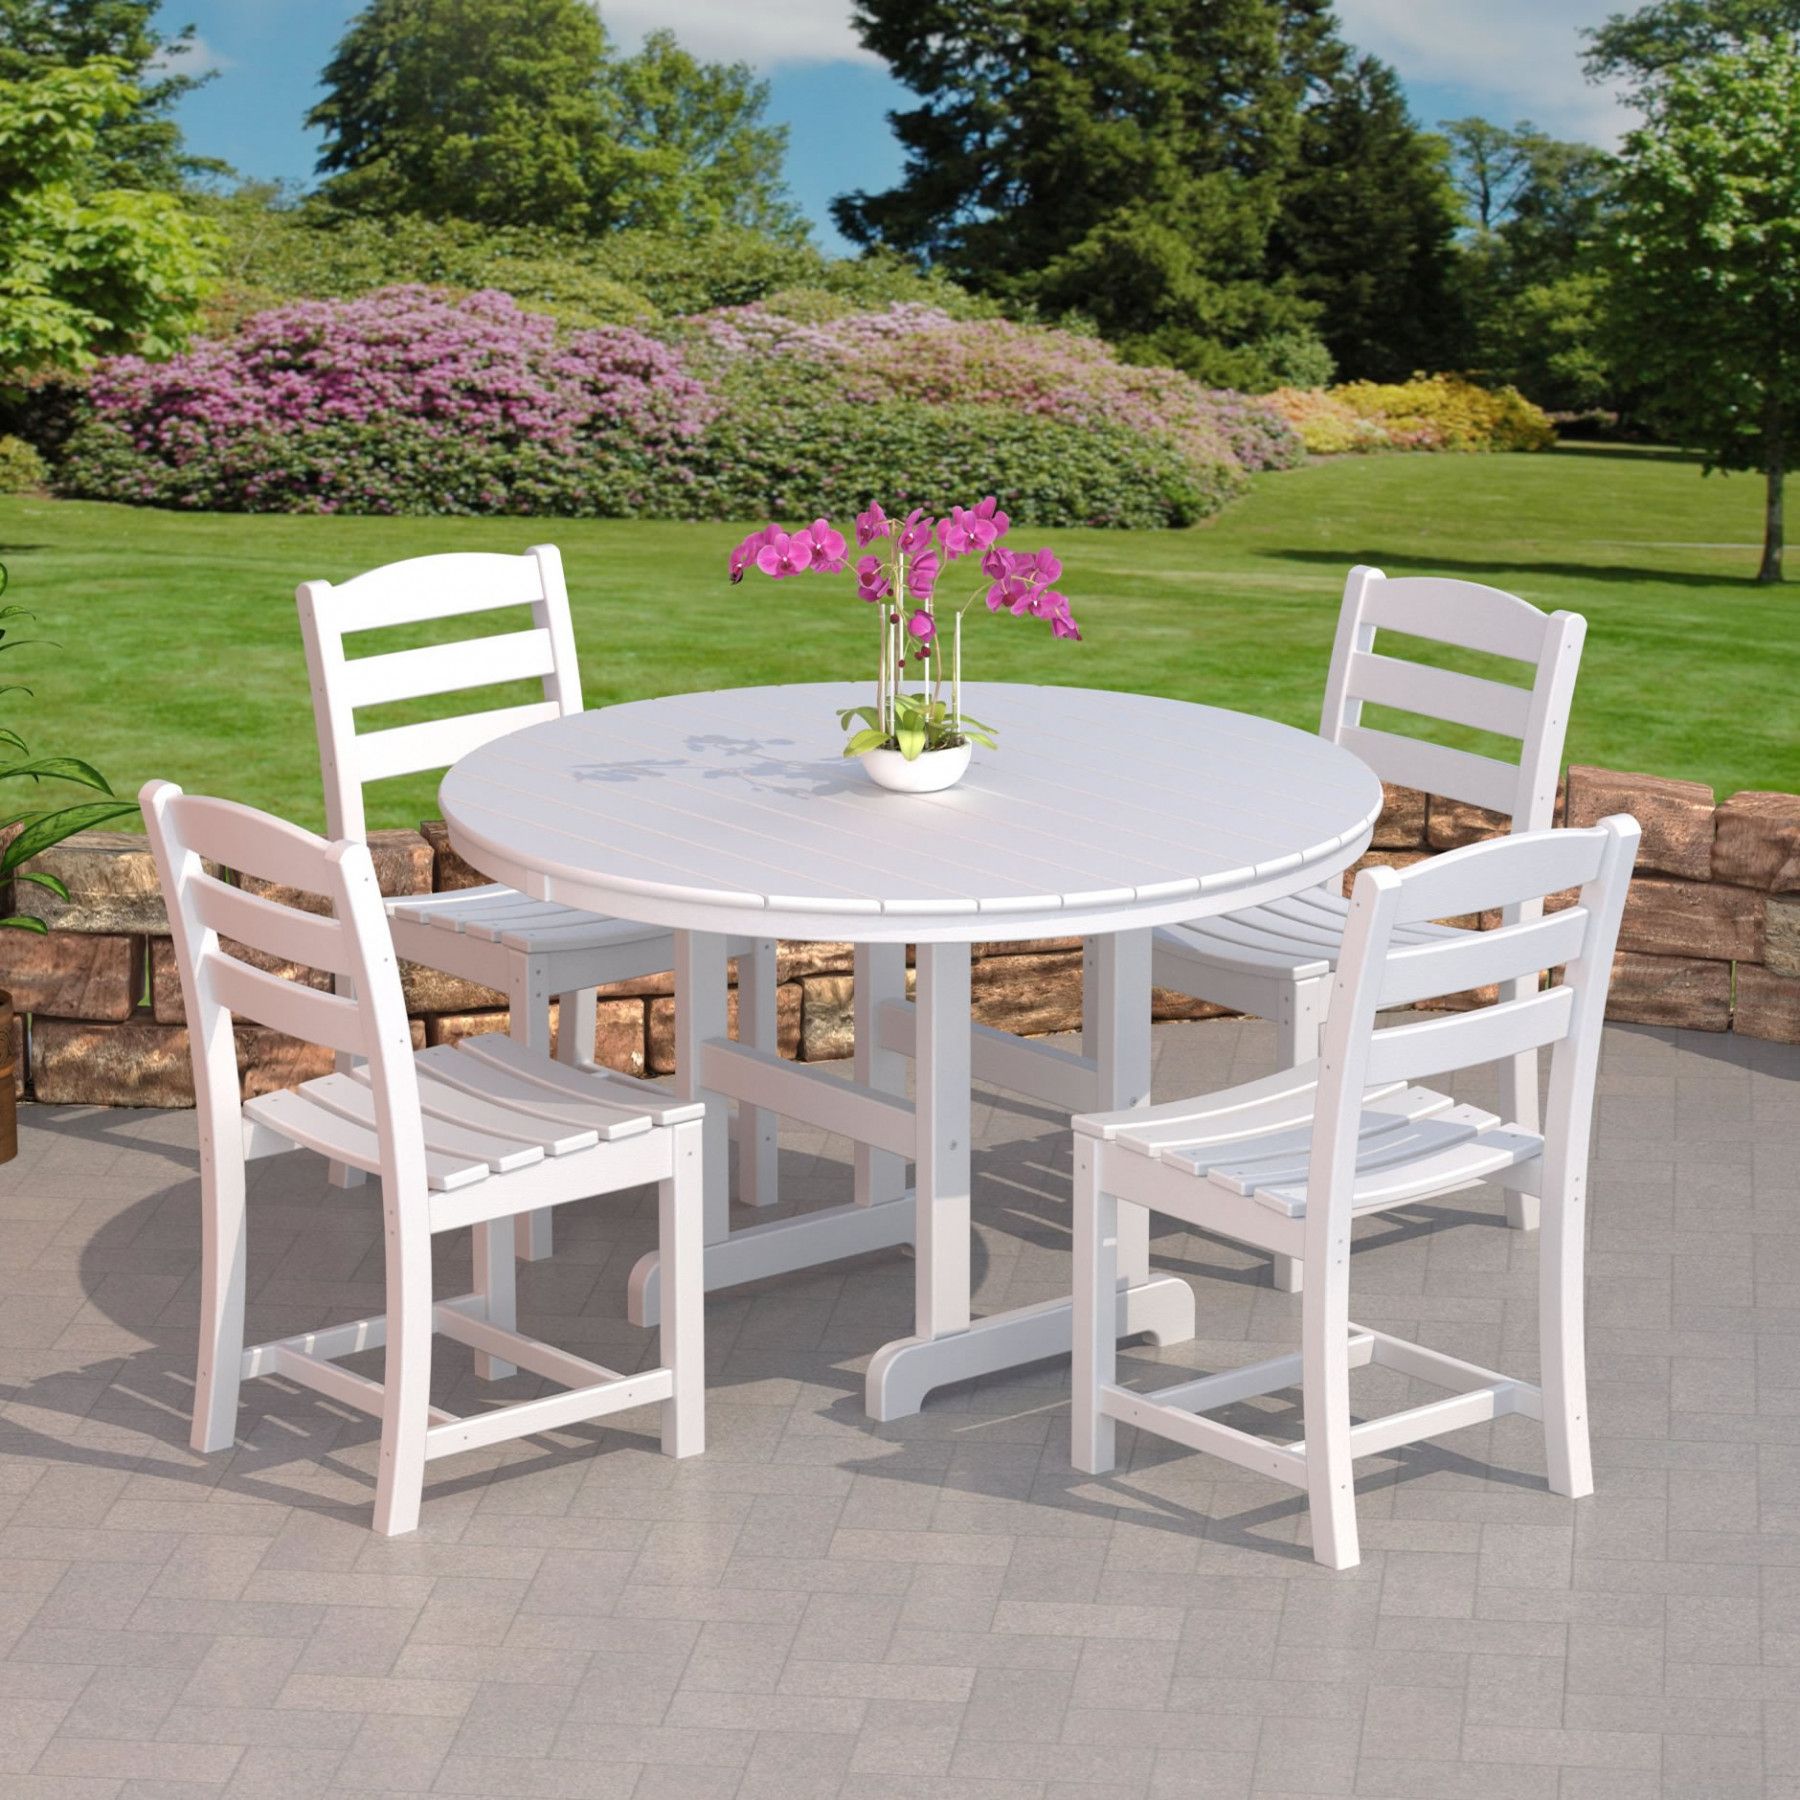 Off White Outdoor Seating Patio Sets Inside Latest Polywood® La Casa Cafe Outdoor Dining Set – Commercial – Collections (View 3 of 15)